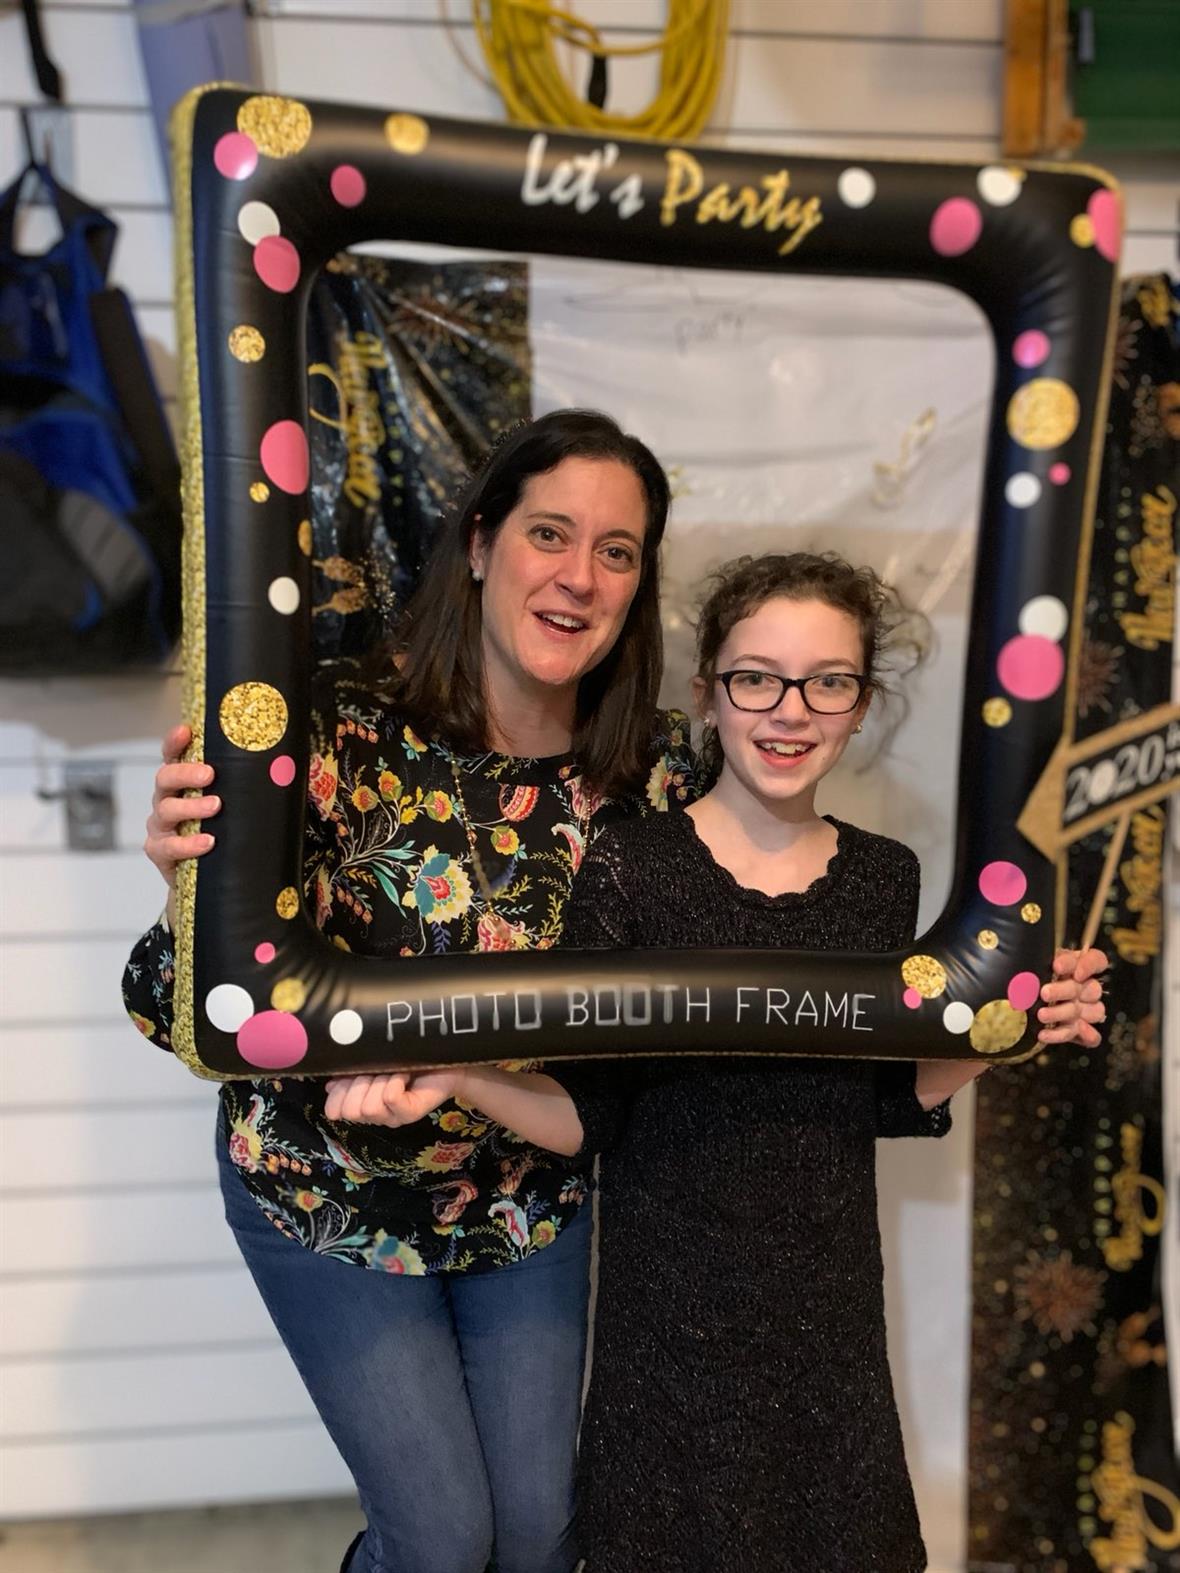 Kelly and Izzy Sherretz pose for a photo with an inflatable photo frame.